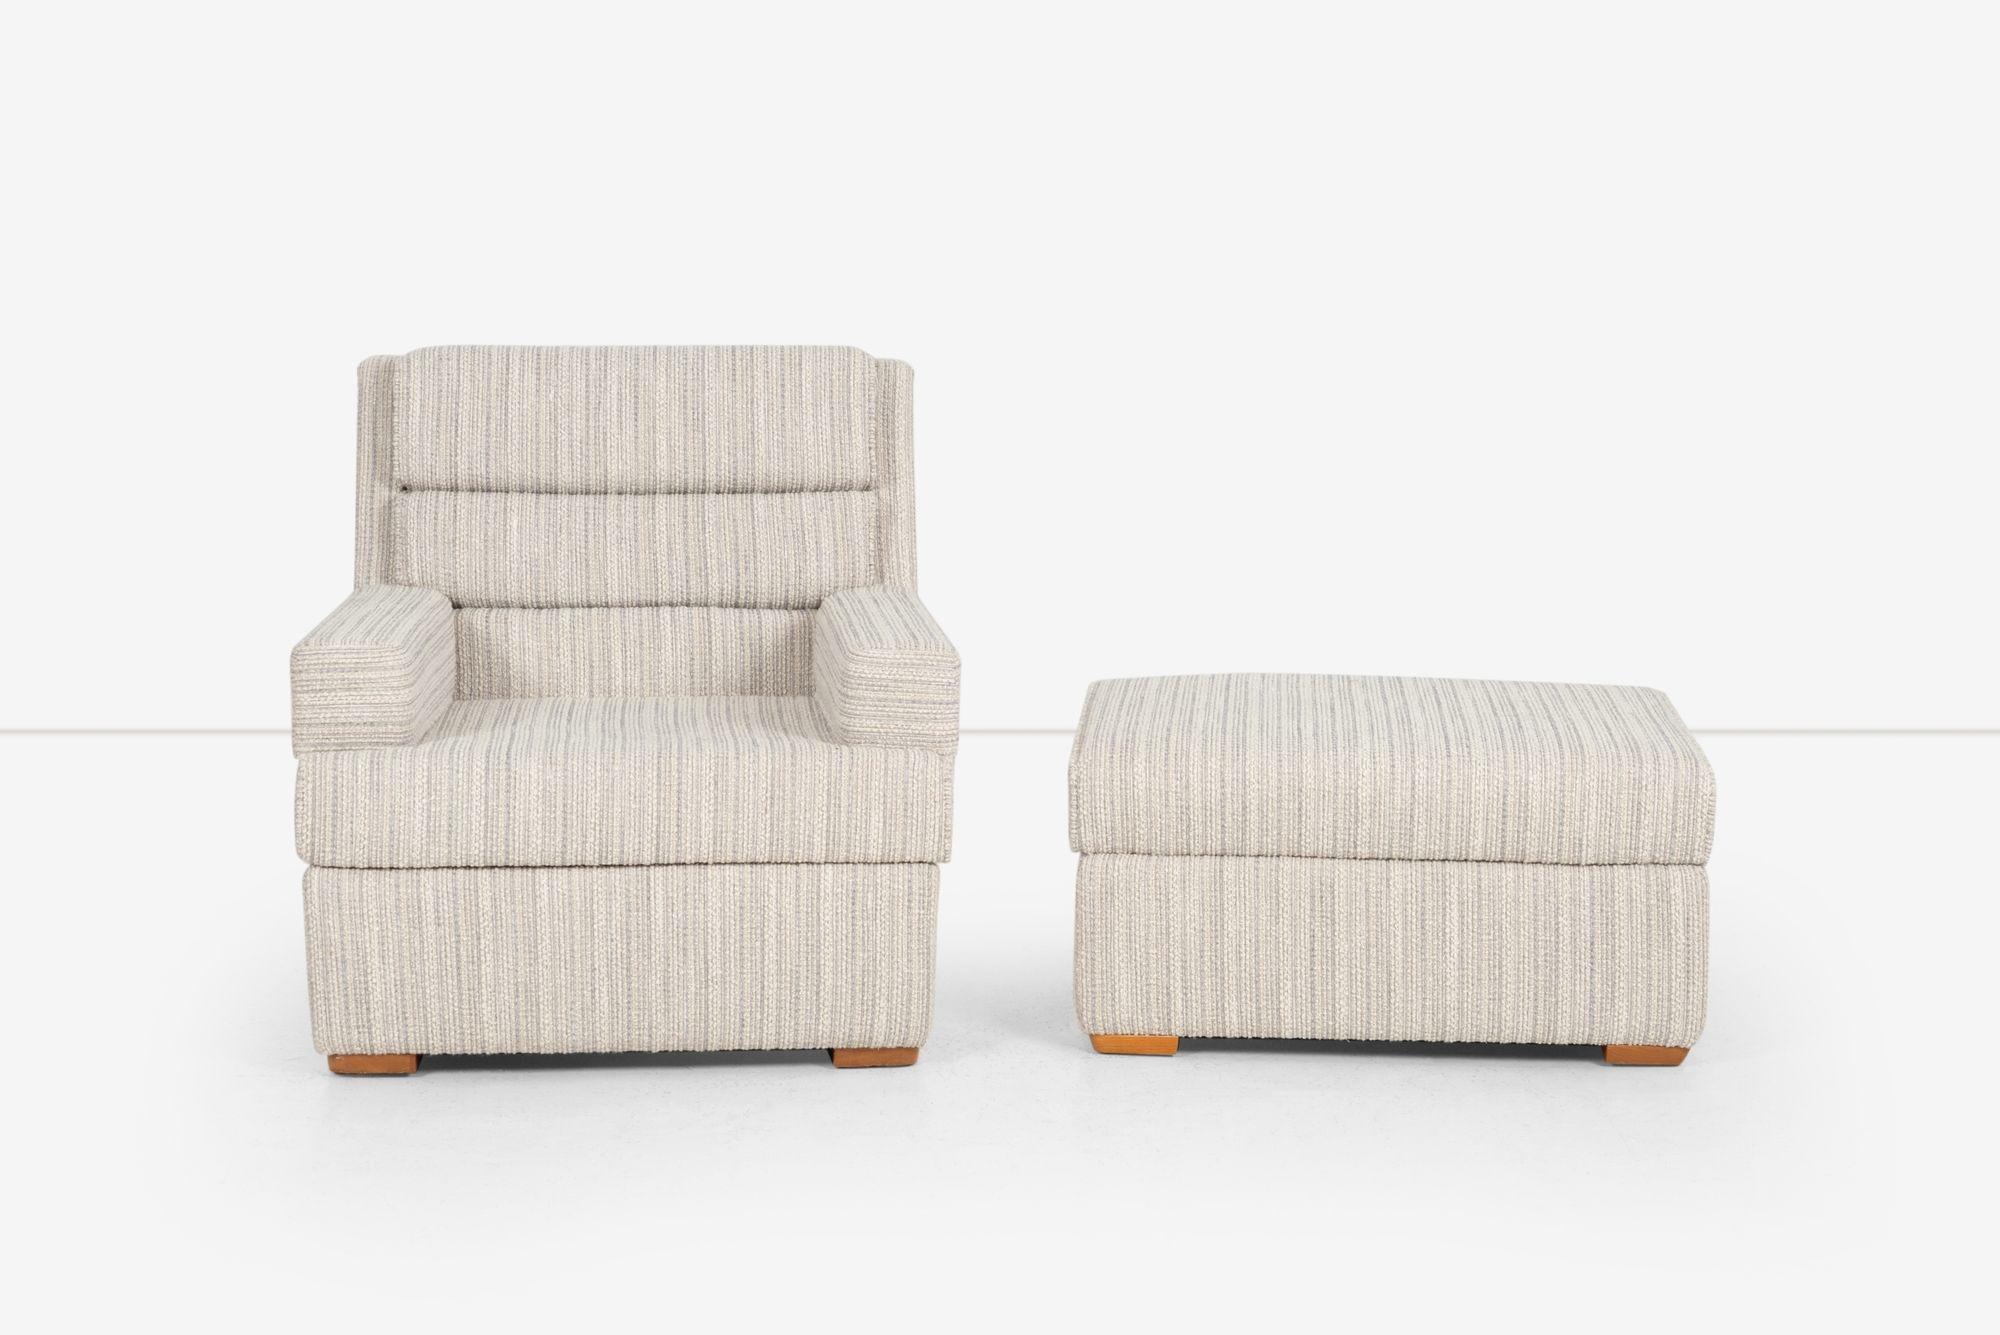 Paul Laszlo for Brown Saltman Lounge and Chair and Ottoman.
The Max comfort Chair has a channeled back with large padded armrests, The Ottoman is customized to match the chair.
We reupholstered it with Great Plains heavy textured cotton-poly fabric